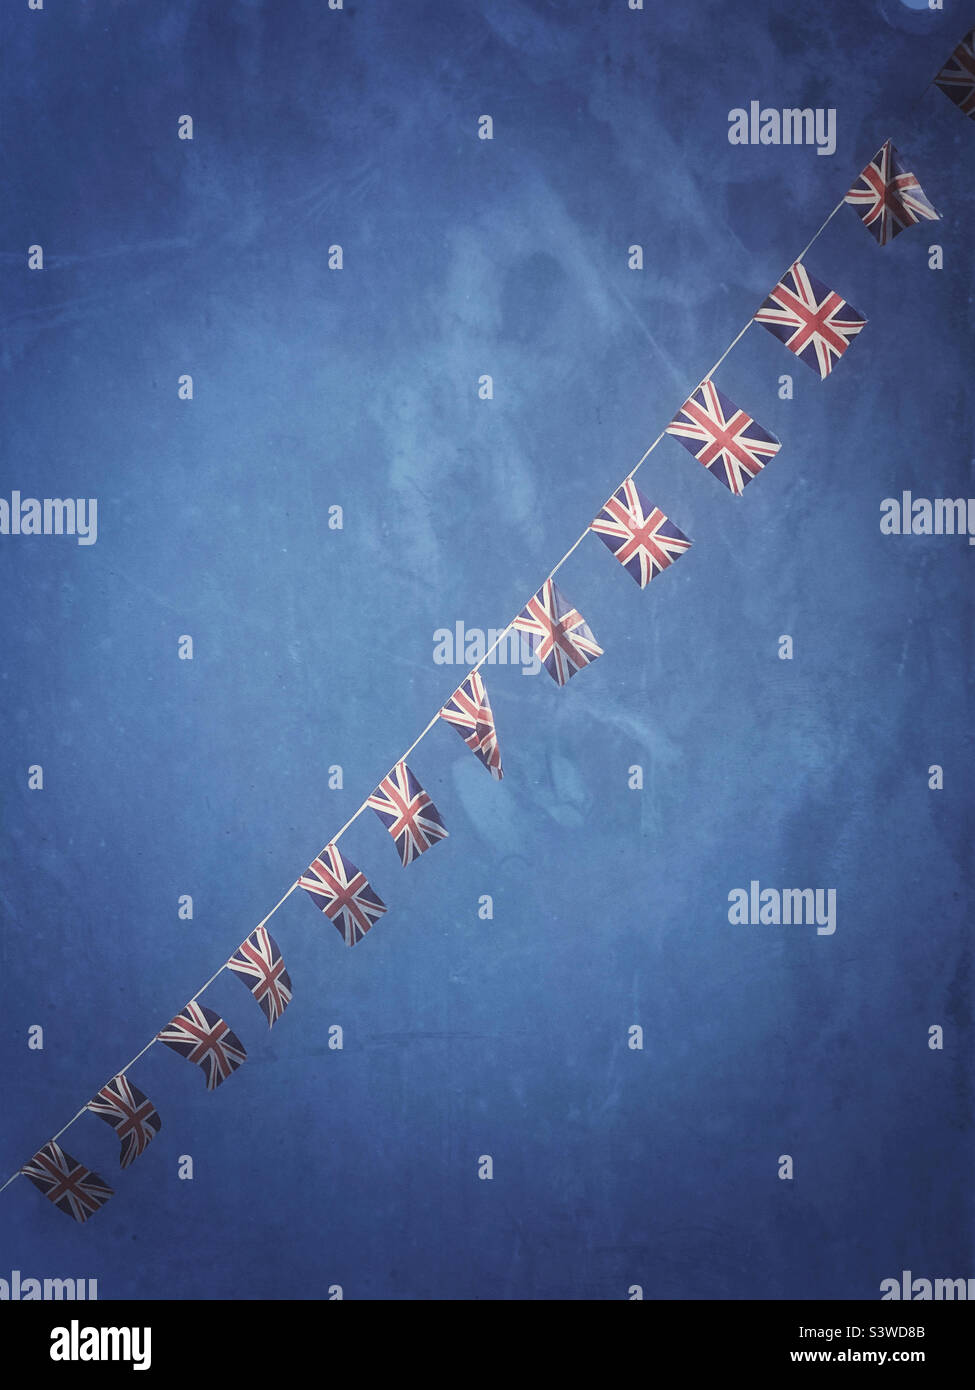 Desaturated and faded Union Jack flags fly in a murky sky on a string of bunting. Is this a visual comment on the effects of Brexit - the UK no longer as dynamic as before? Photo ©️ COLIN HOSKINS. Stock Photo